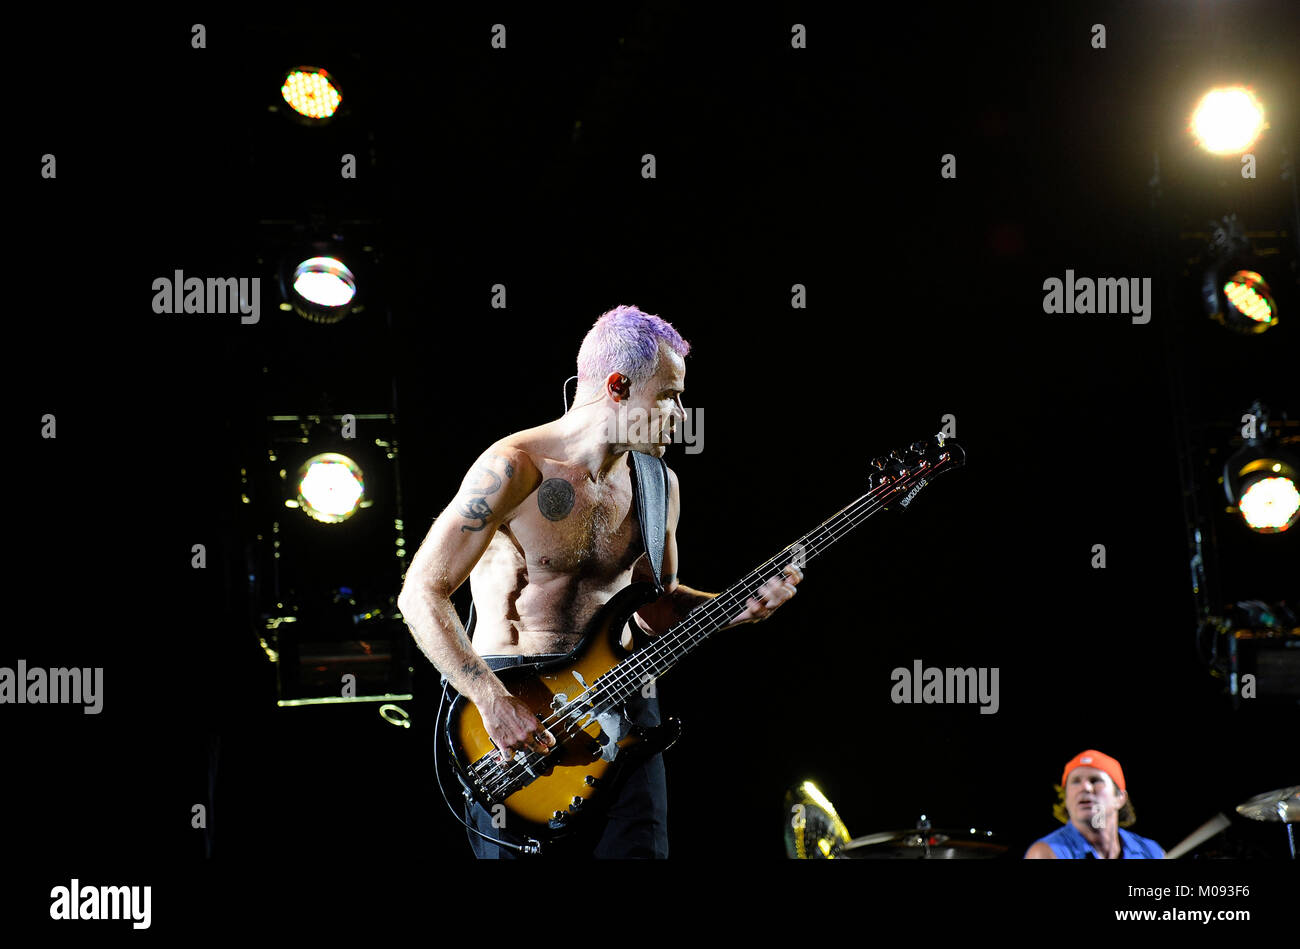 The American rock band Red Hot Chili Peppers performs a live concert at the German music festival Rock im Pott 2012 at Veltins-Arena in Gelsenkirchen. Here the bassist Michael Peter Balzary (better known as Flea) is pictured live on stage. Germany, 25/08 2012. Stock Photo